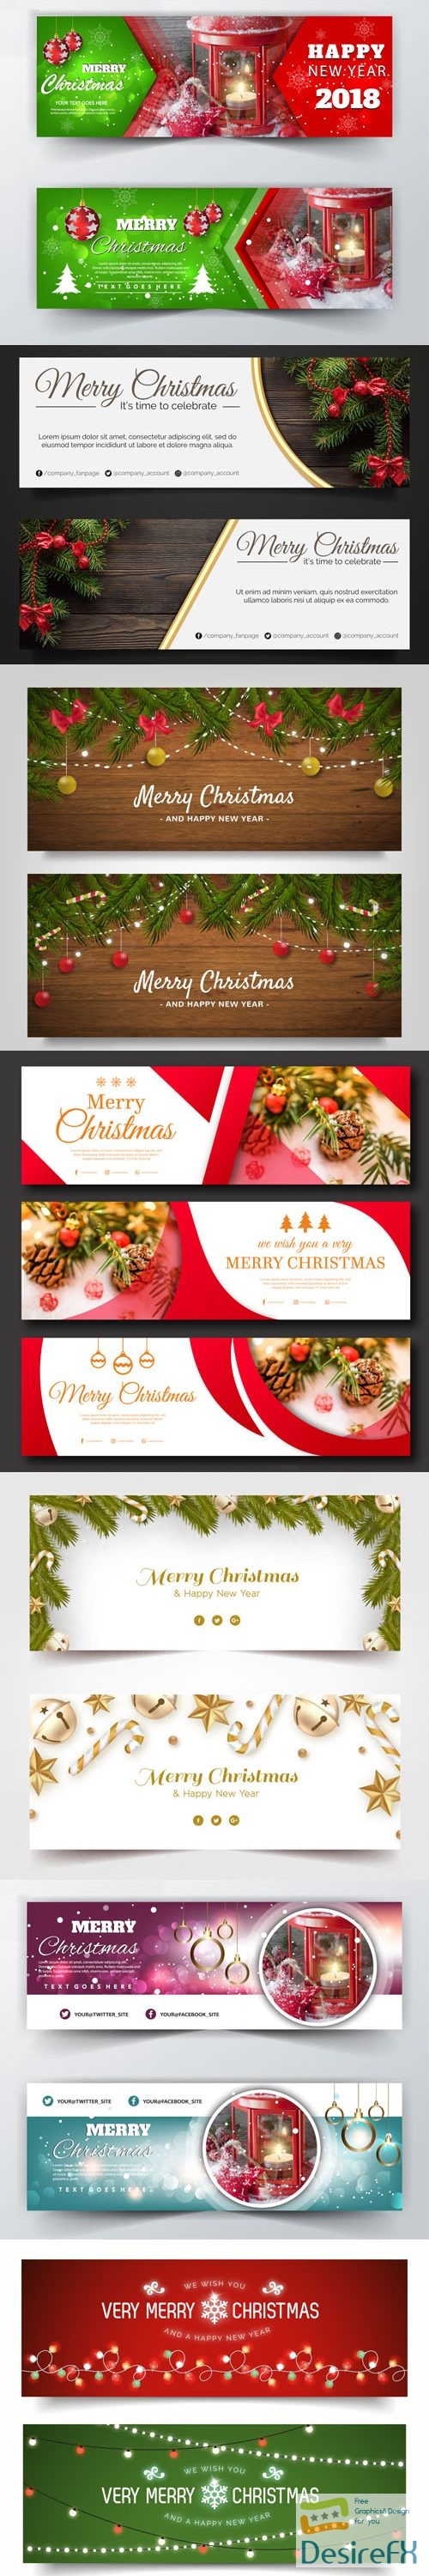 7 Merry Christmas Holiday Banners Collection in Vector